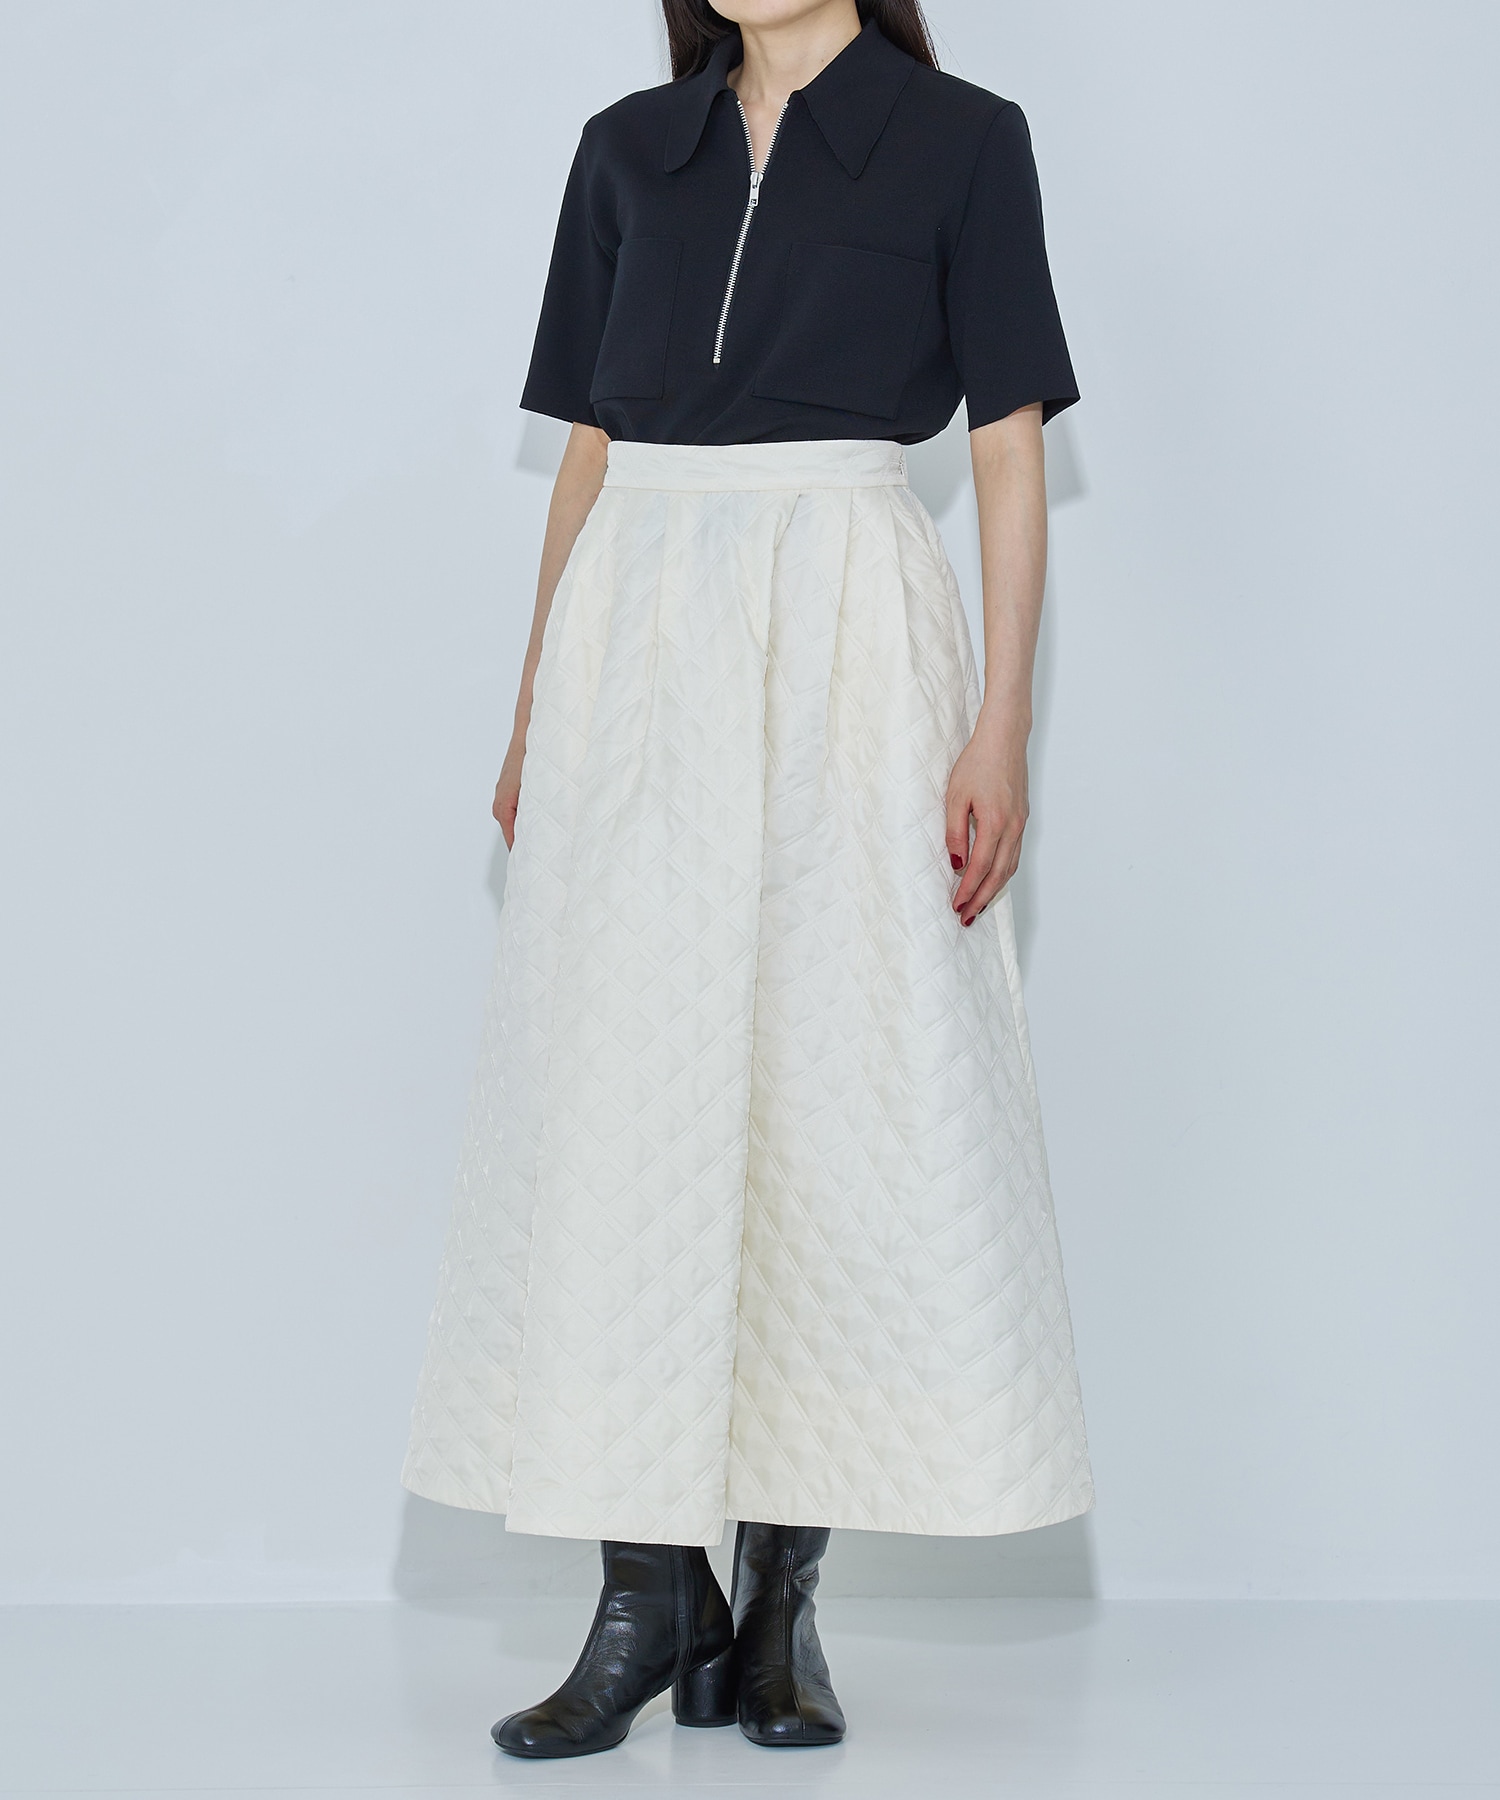 Quilting Flare Skirt STUDIOUS